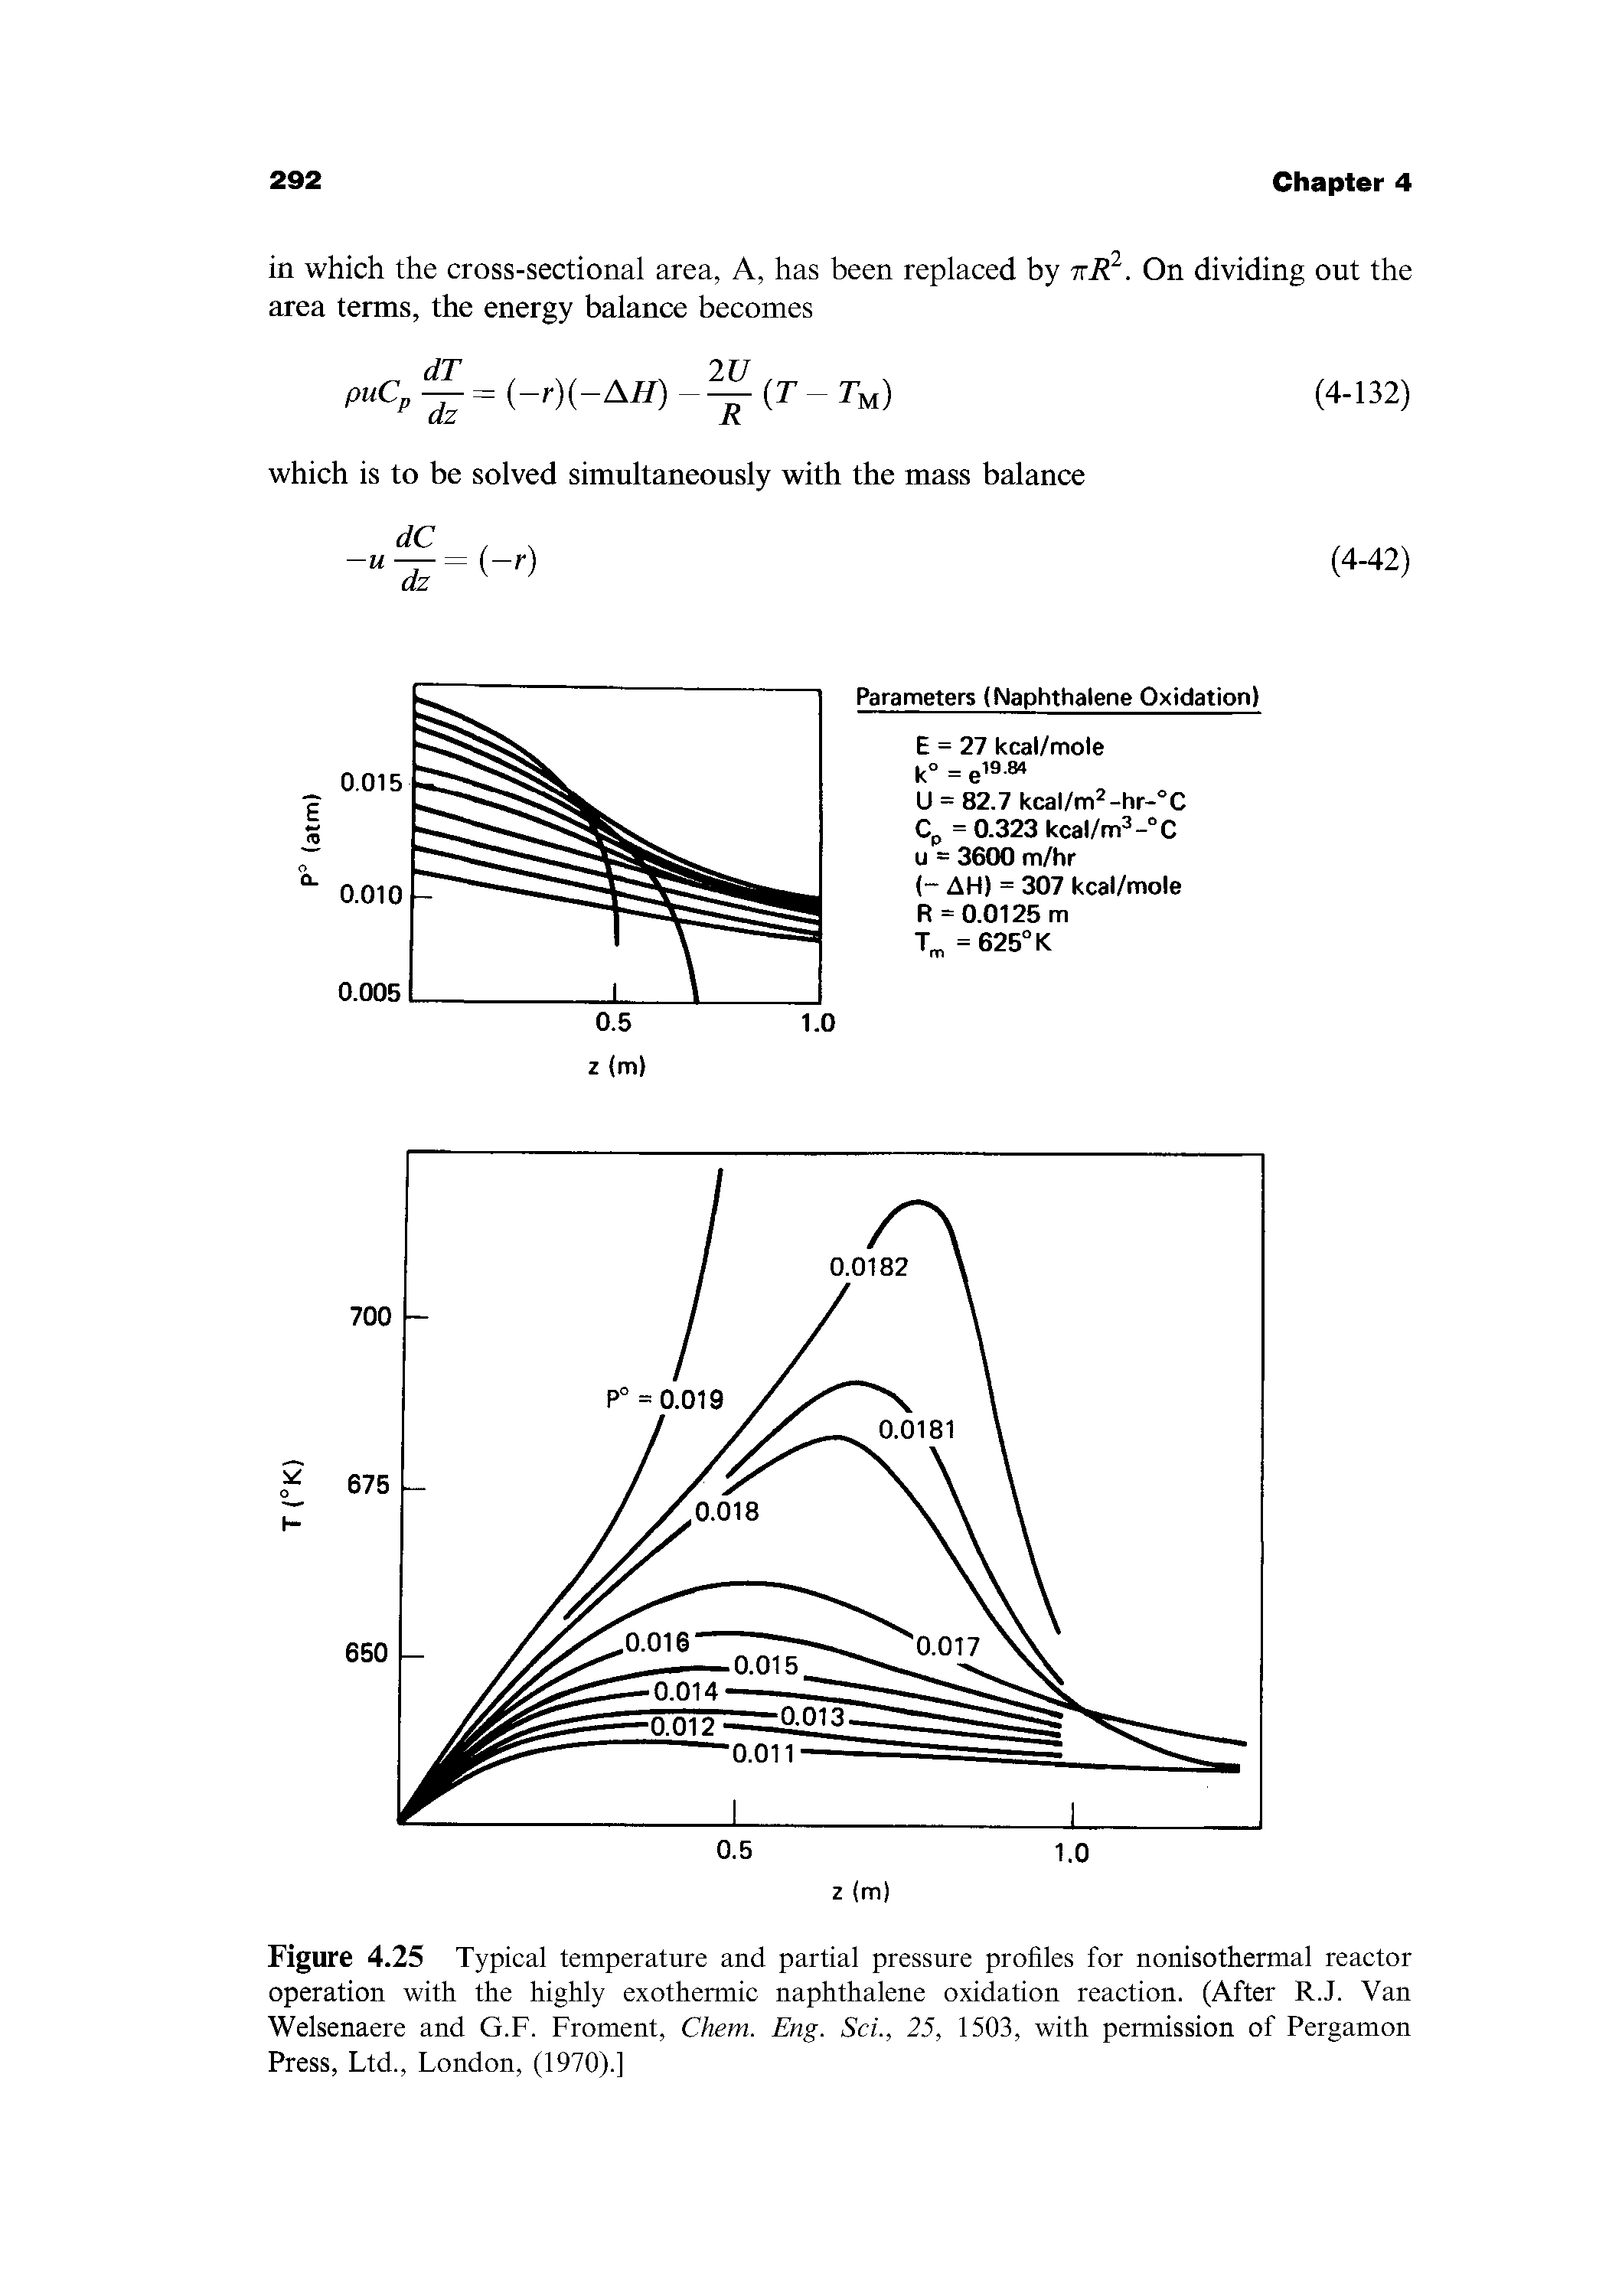 Figure 4.25 Typical temperature and partial pressure profiles for nonisothermal reactor operation with the highly exothermic naphthalene oxidation reaction. (After R.J. Van Welsenaere and G.F. Froment, Chem. Eng. Sci., 25, 1503, with permission of Pergamon Press, Ltd., London, (1970).]...